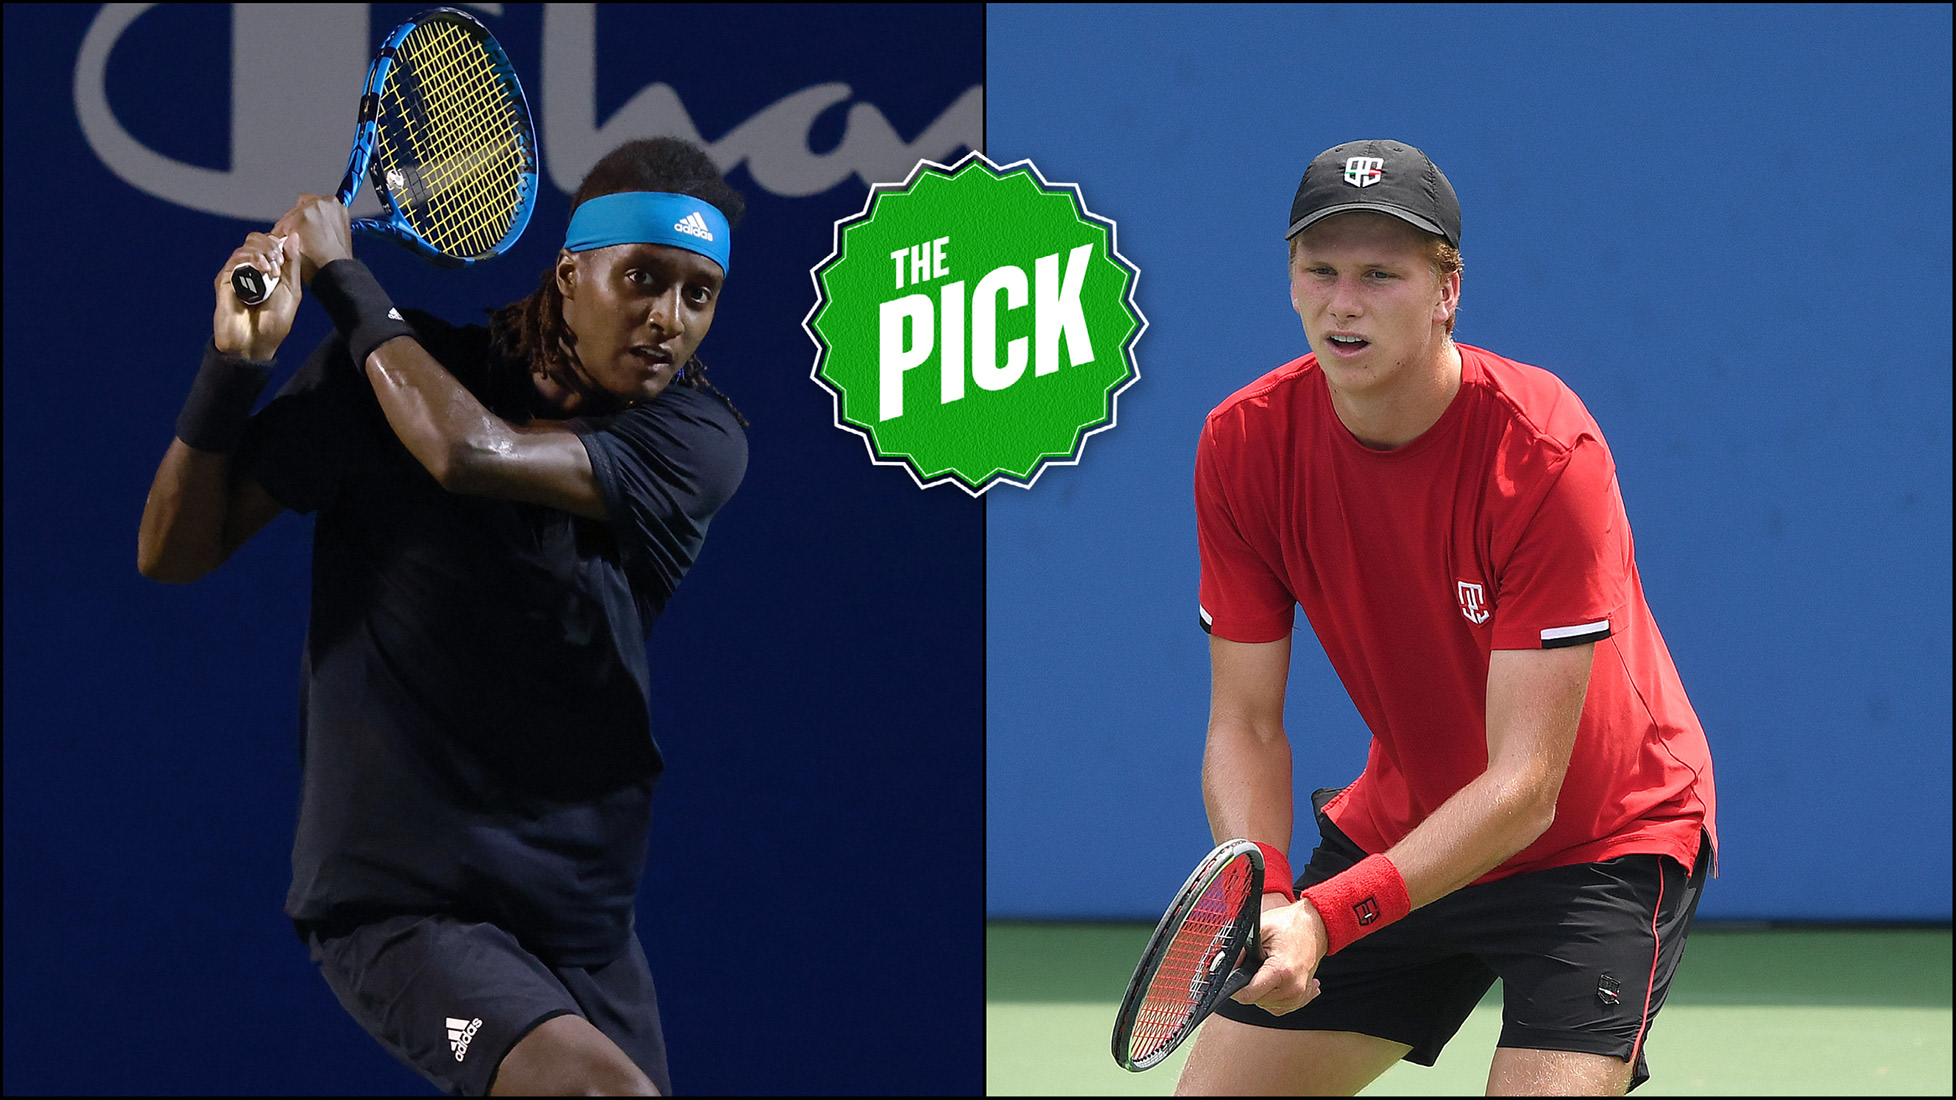 The Pick Mikael Ymer vs